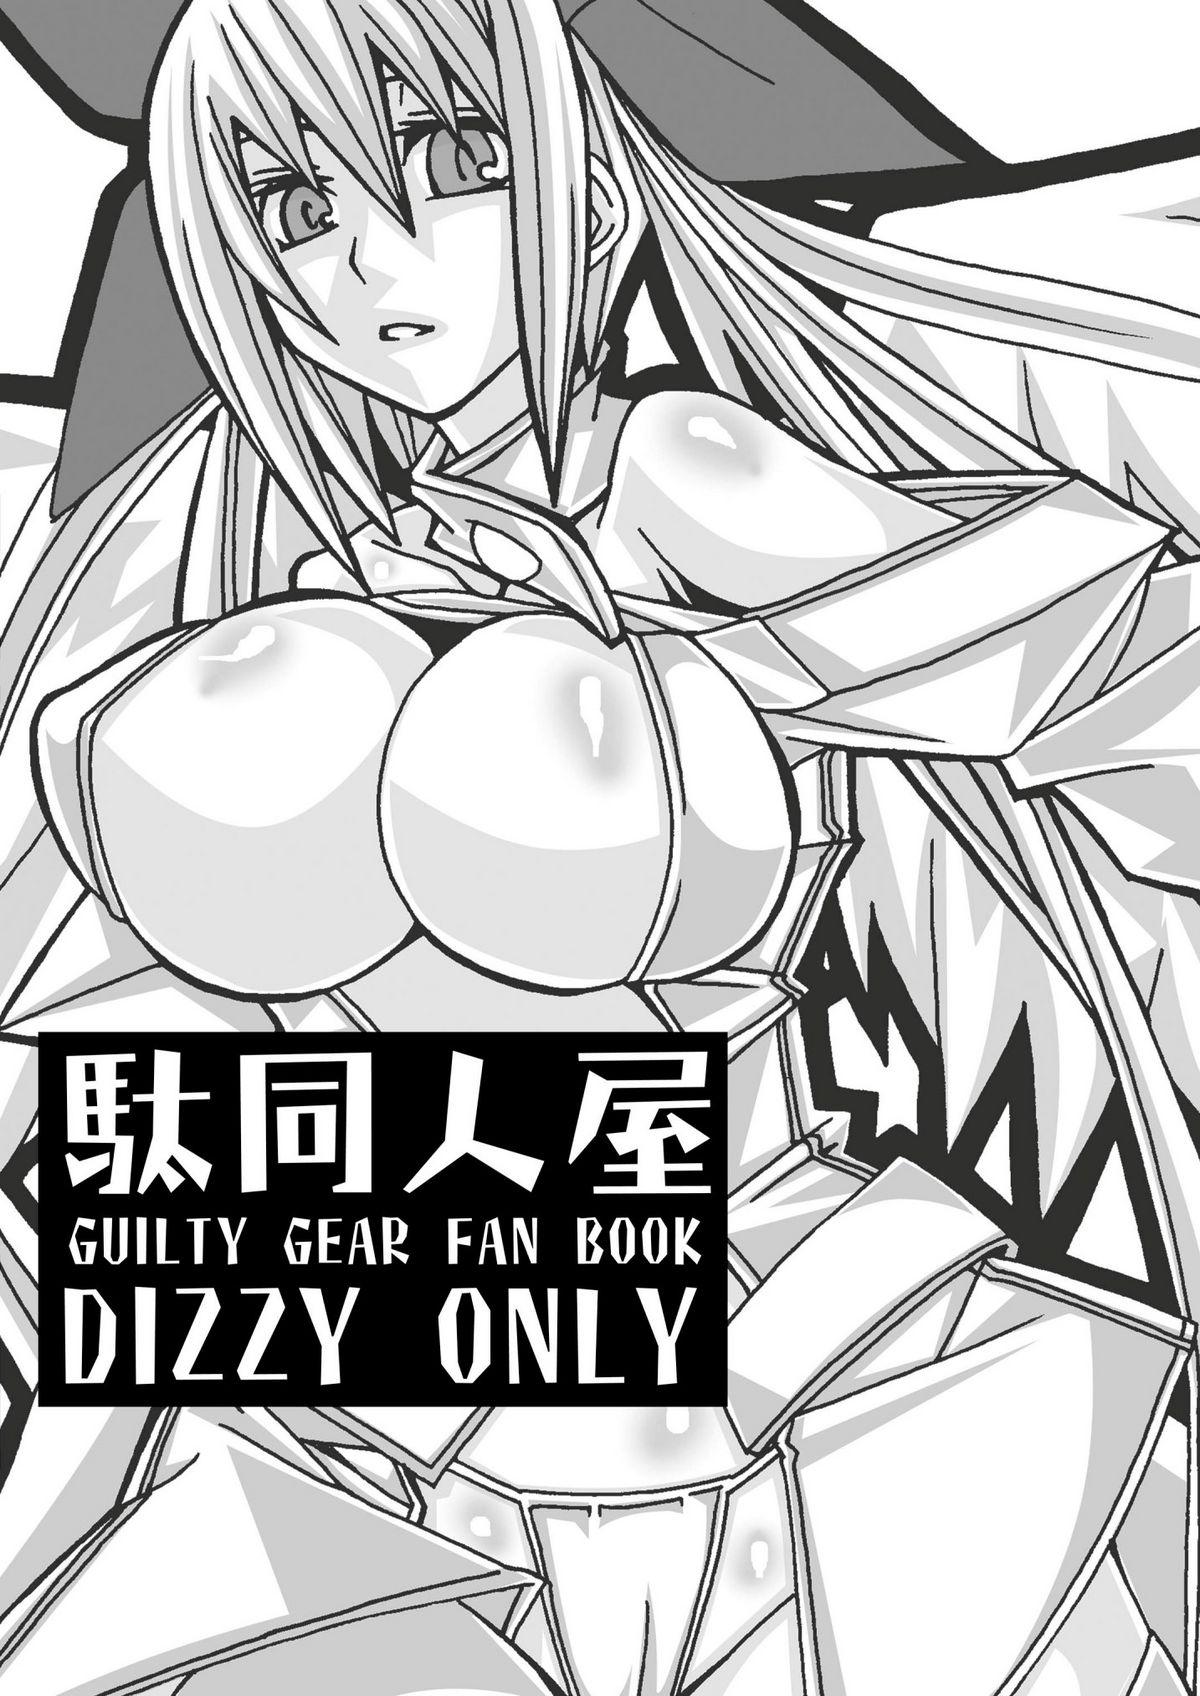 Tanned ディズィーさんの発情日記 ちょこっとぷらす - Guilty gear Negao - Page 24